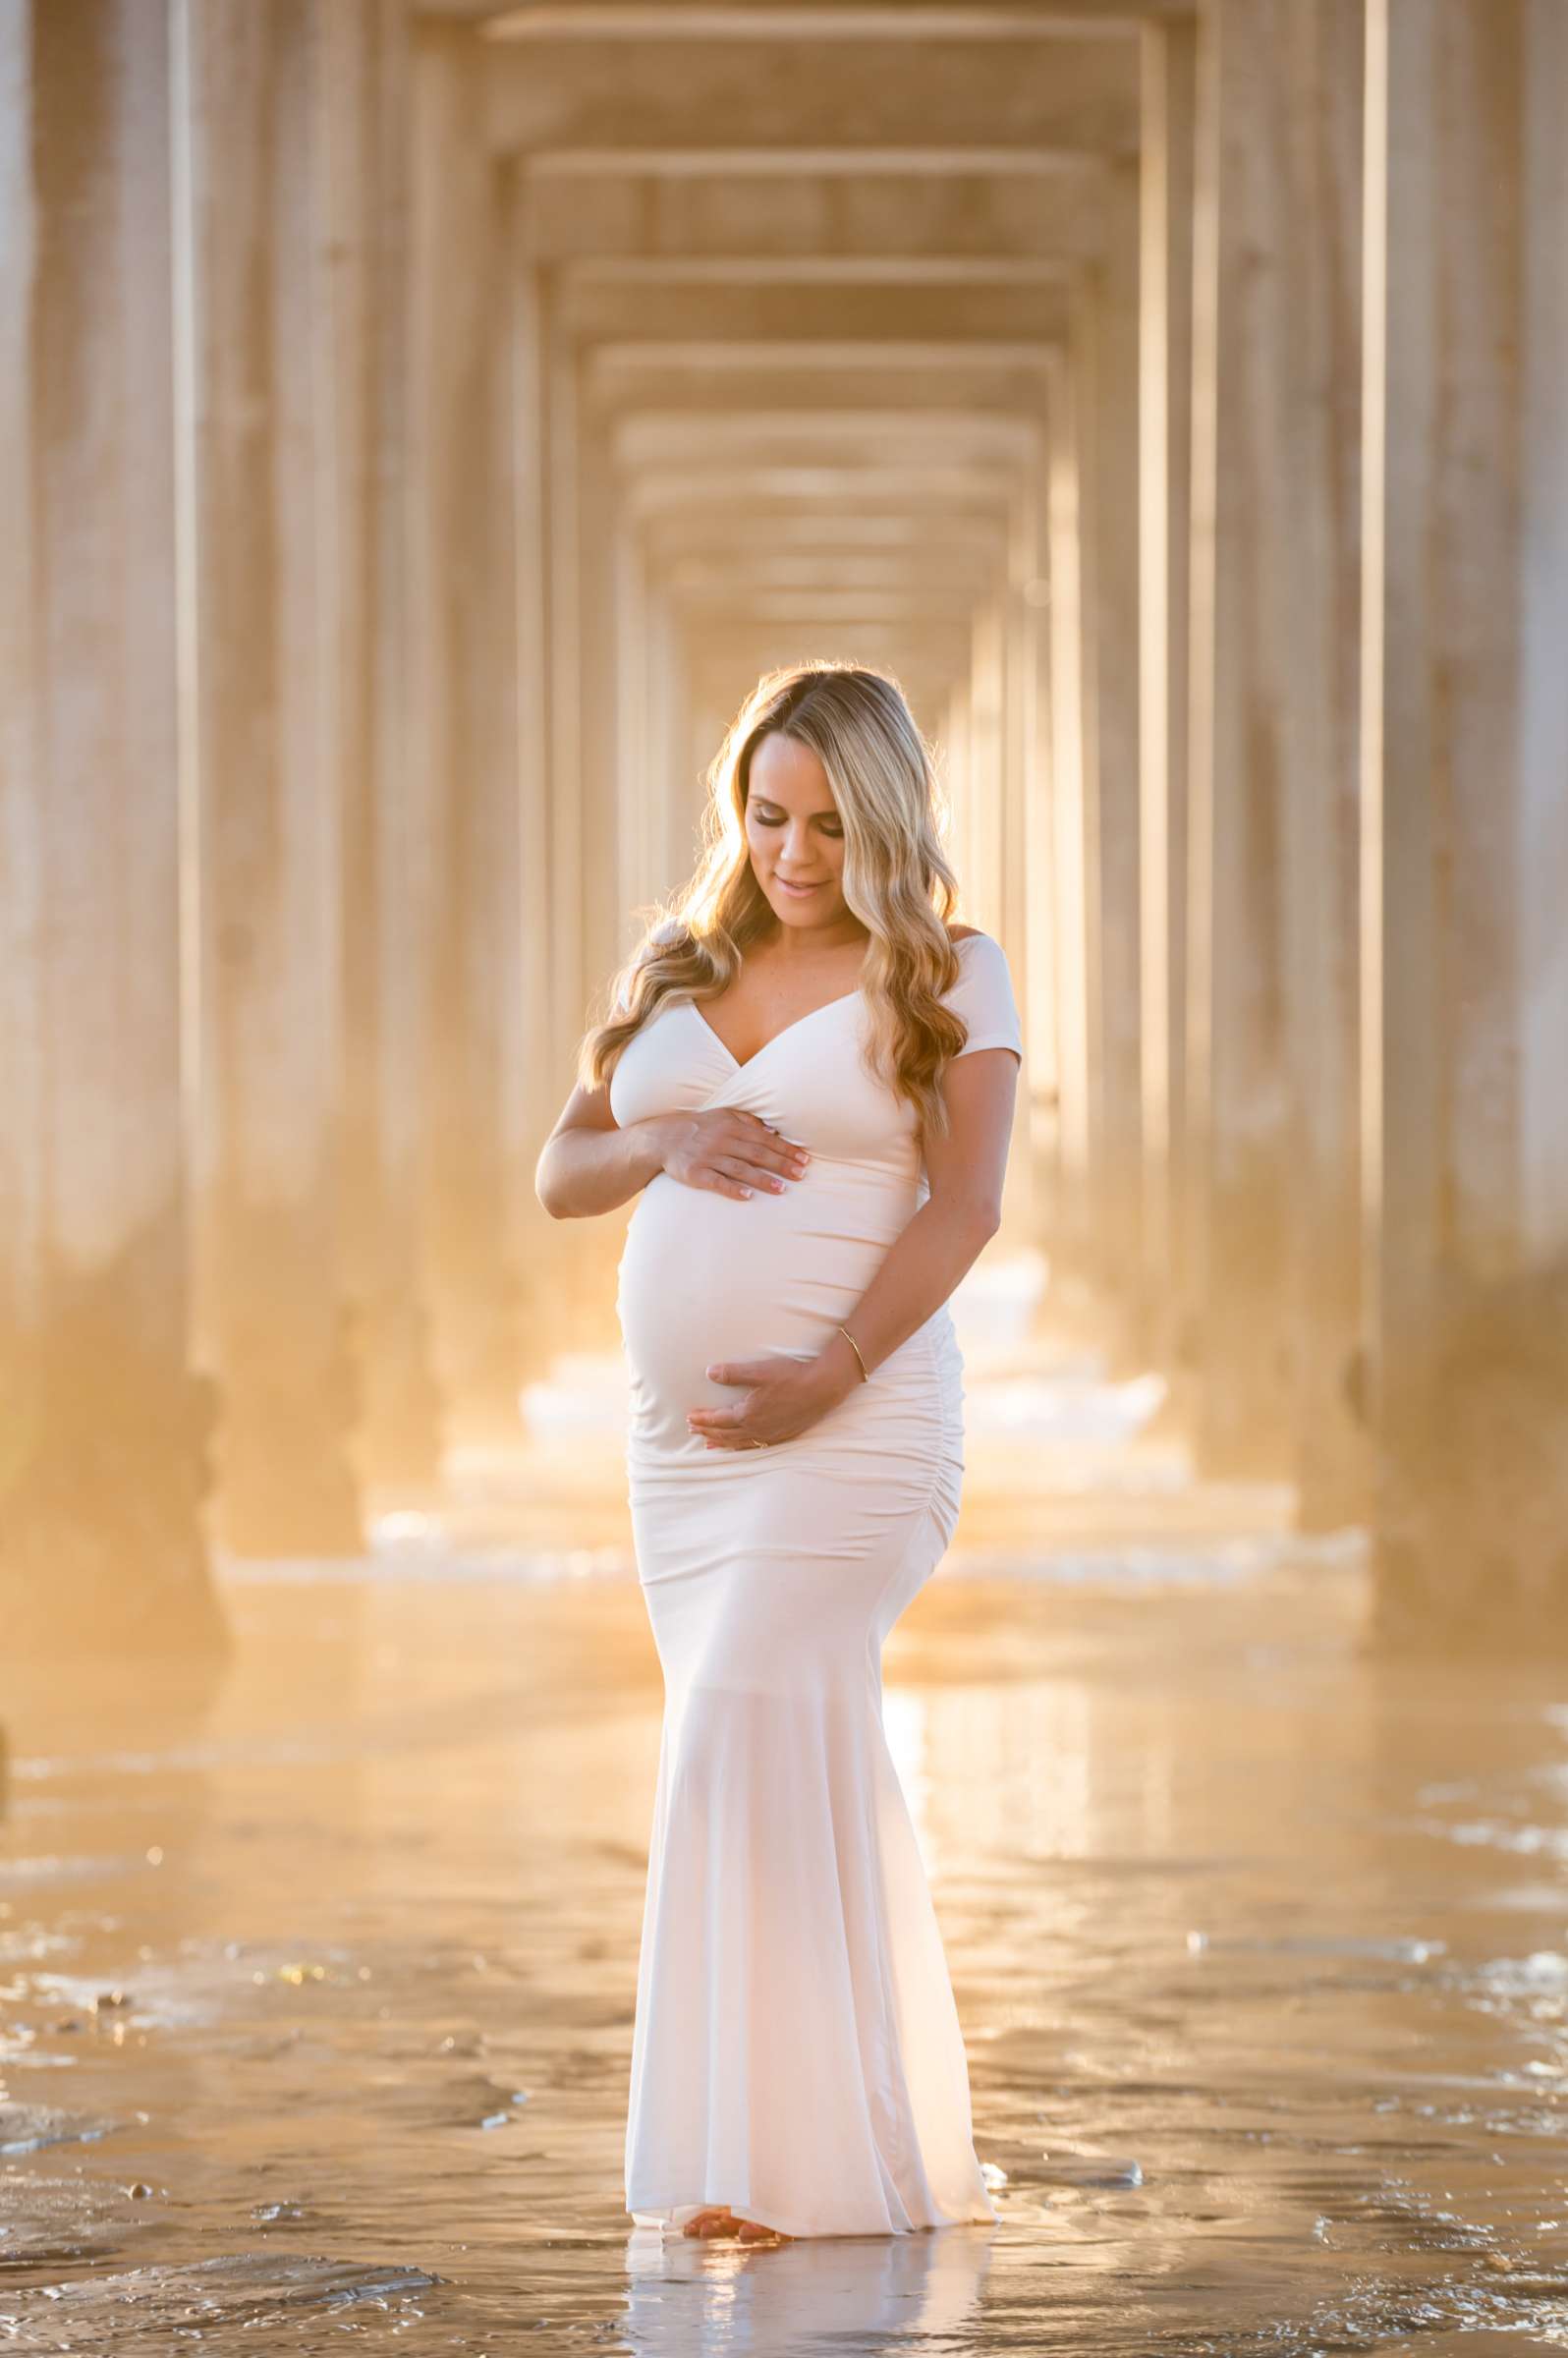 Maternity Photo Session, Danielle P Maternity Photo #1 by True Photography